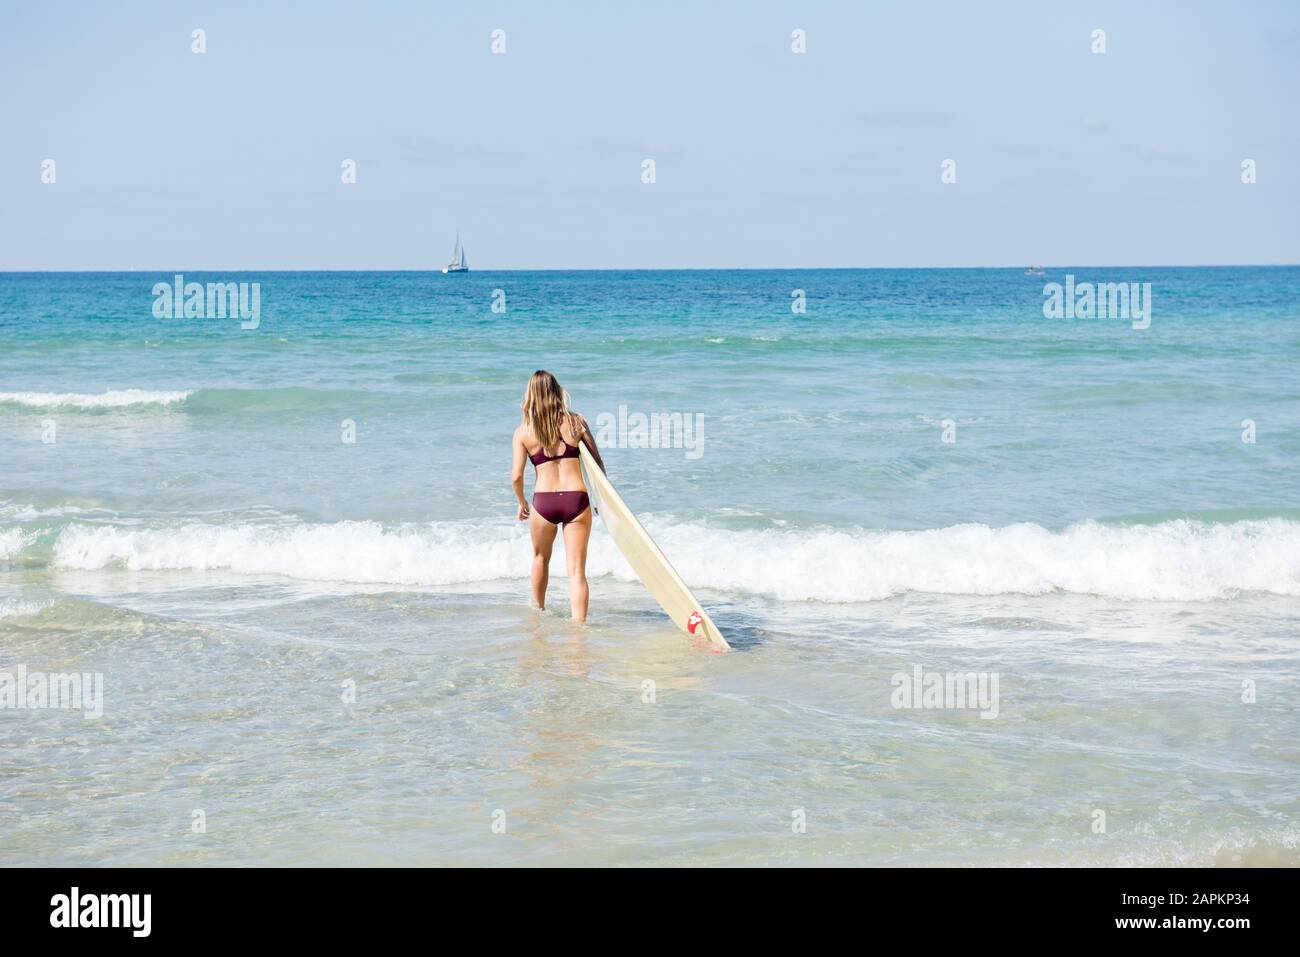 Surfs up as a female surfer heads into the waves in Israel Stock Photo